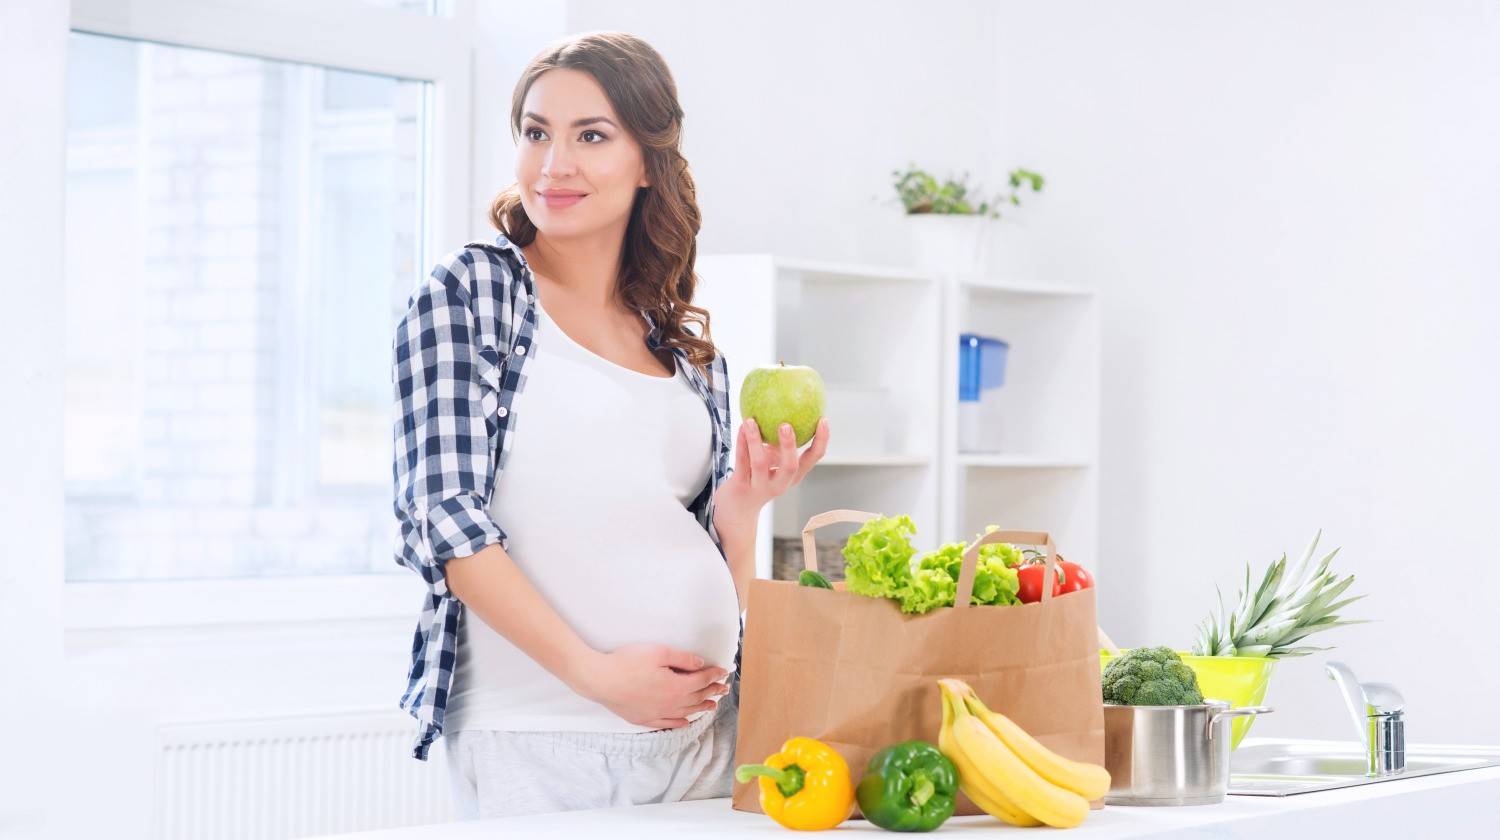 Beautiful pregnant woman in the kitchen with shopping bag and apple | Vegan Pregnancy Diet: Top 8 Foods That Are Good For You And Your Baby | green leafy vegetables | Featured